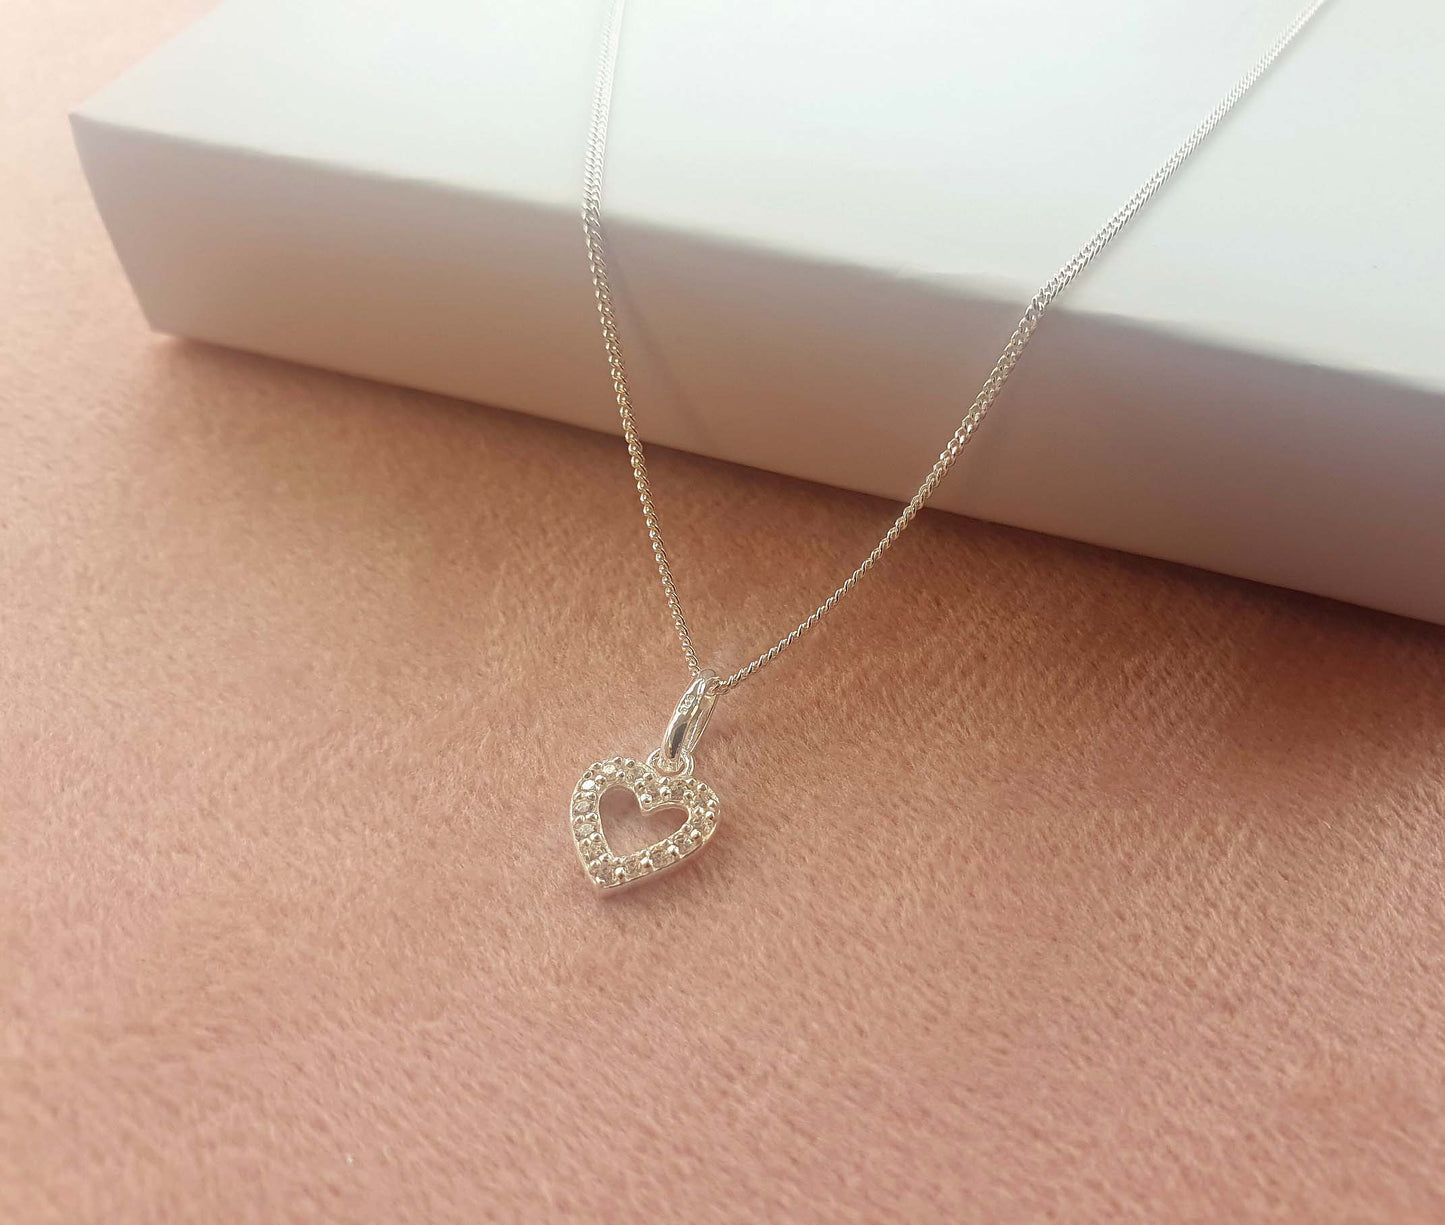 Step Mum of the Bride Heart Necklace with Cubic Zirconia in Sterling Silver 925, Personalised Gift